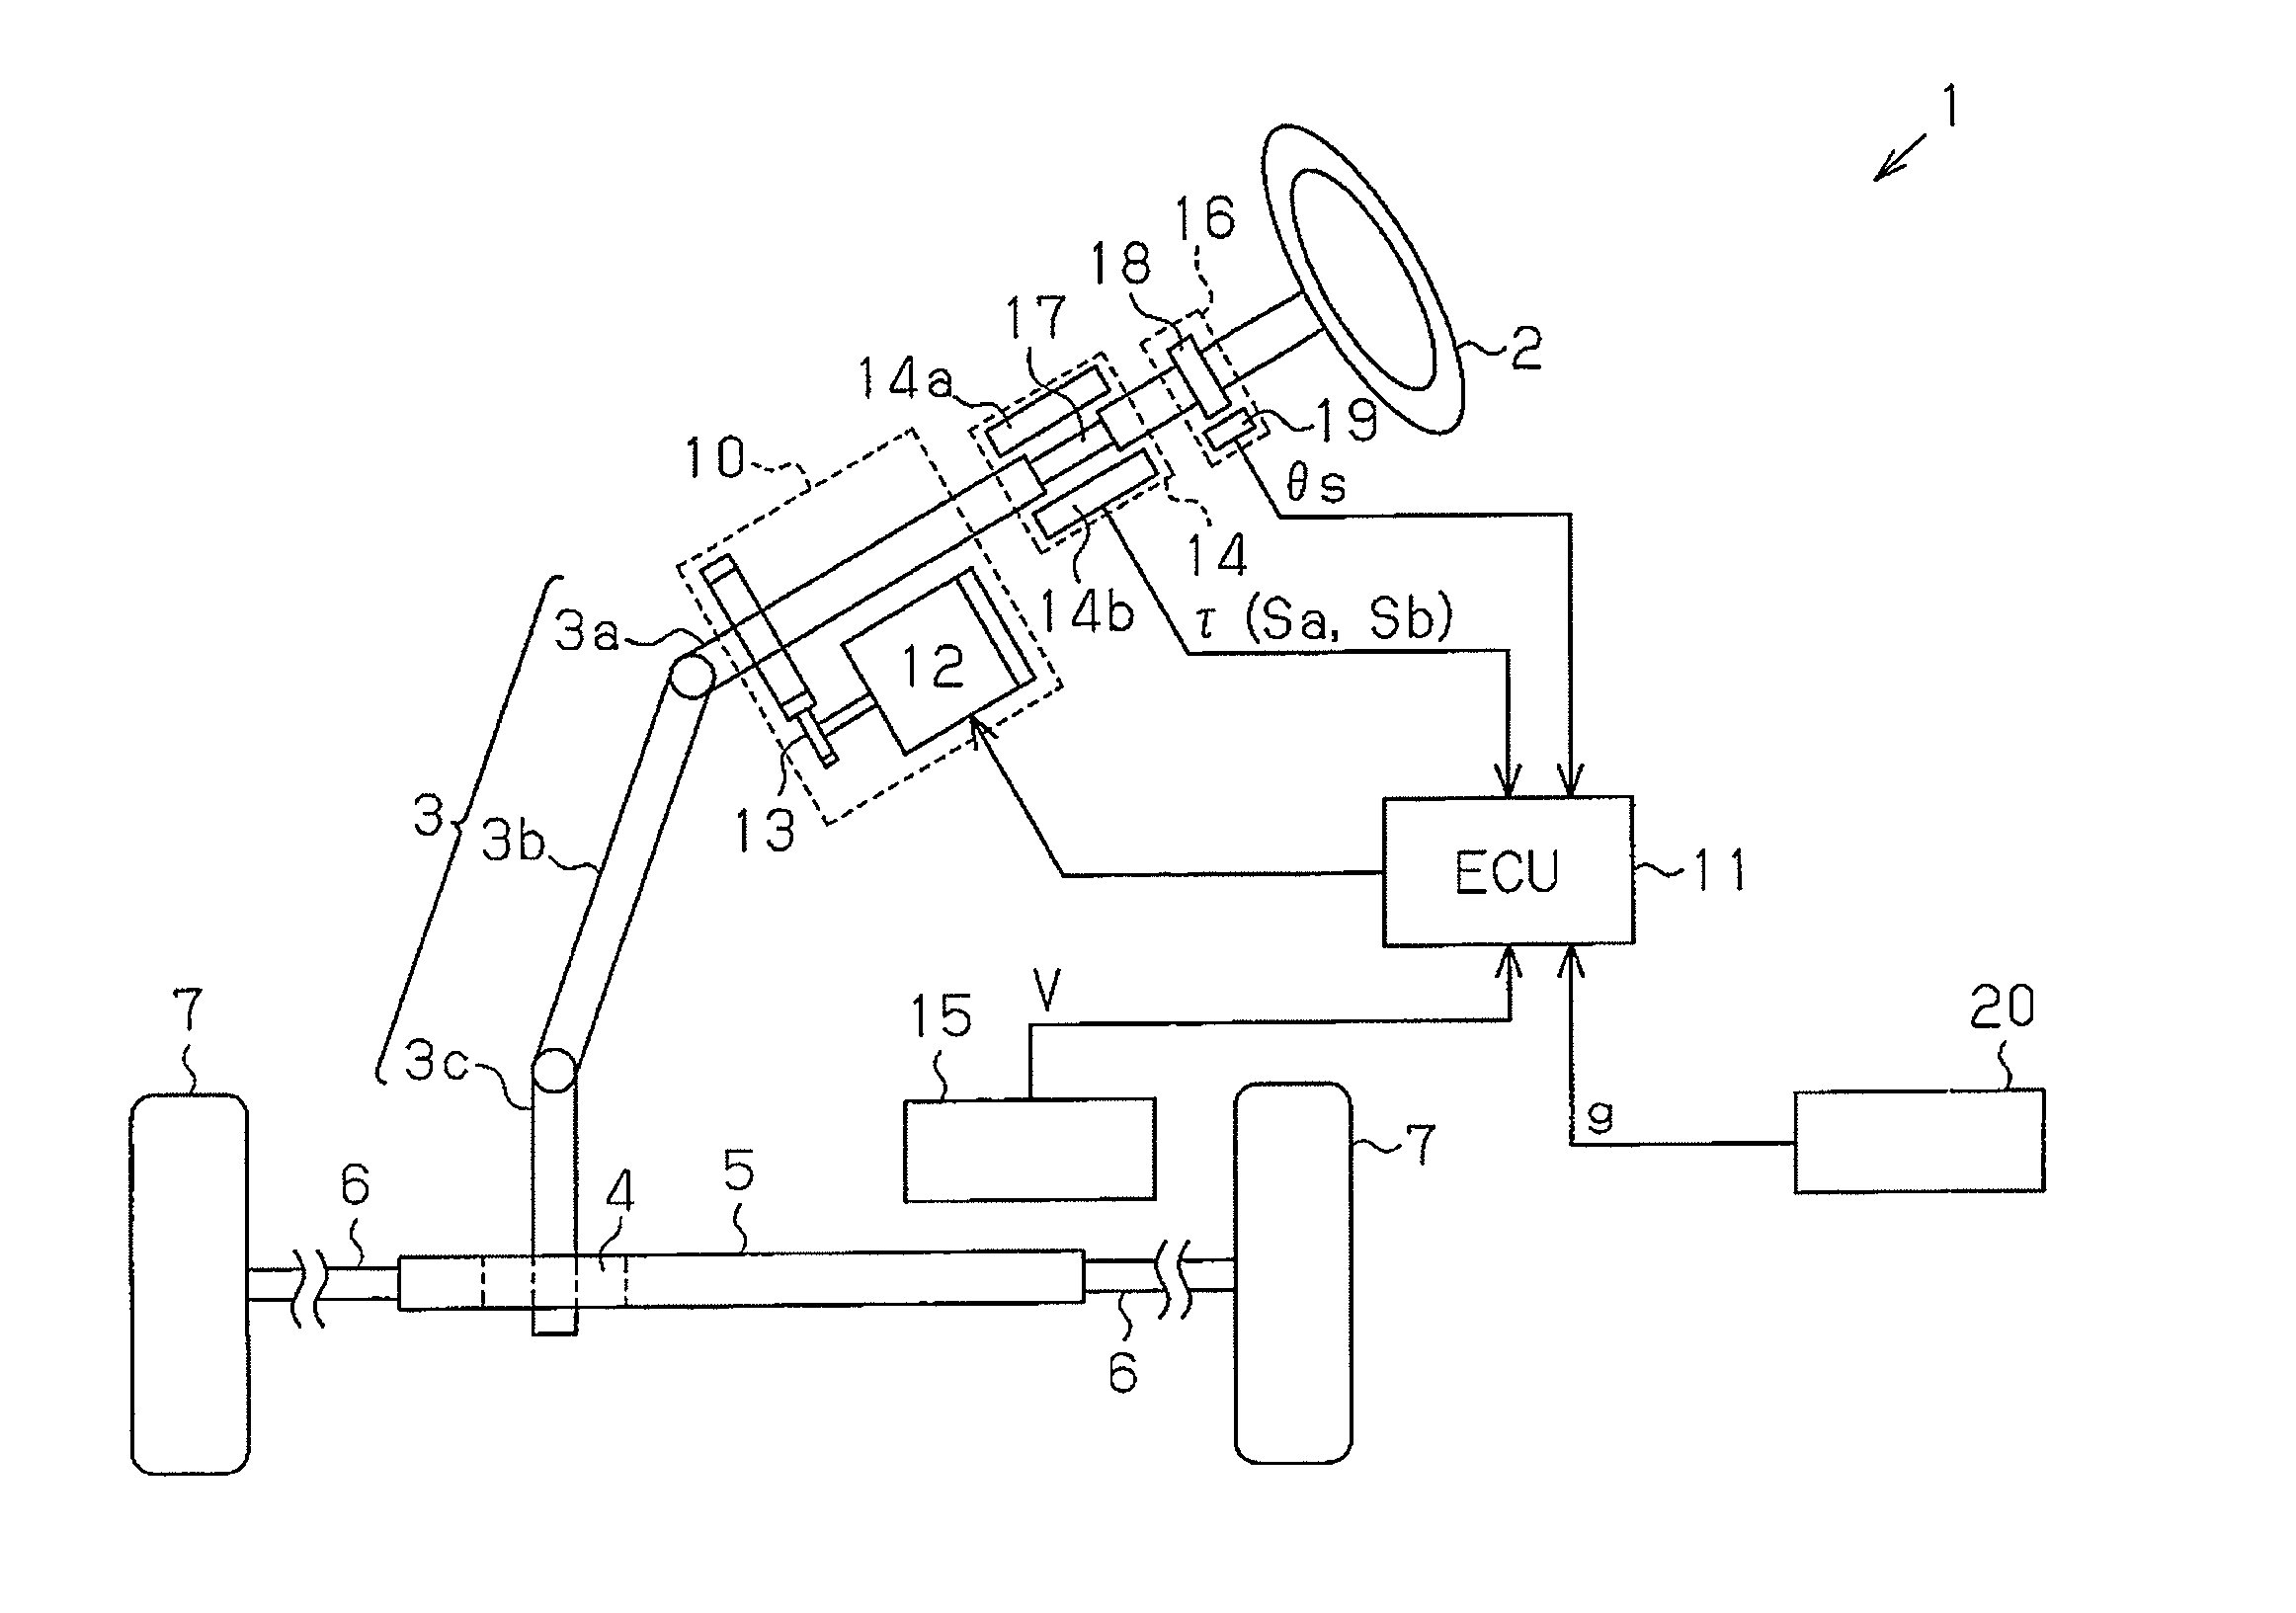 Electronic power steering apparatus